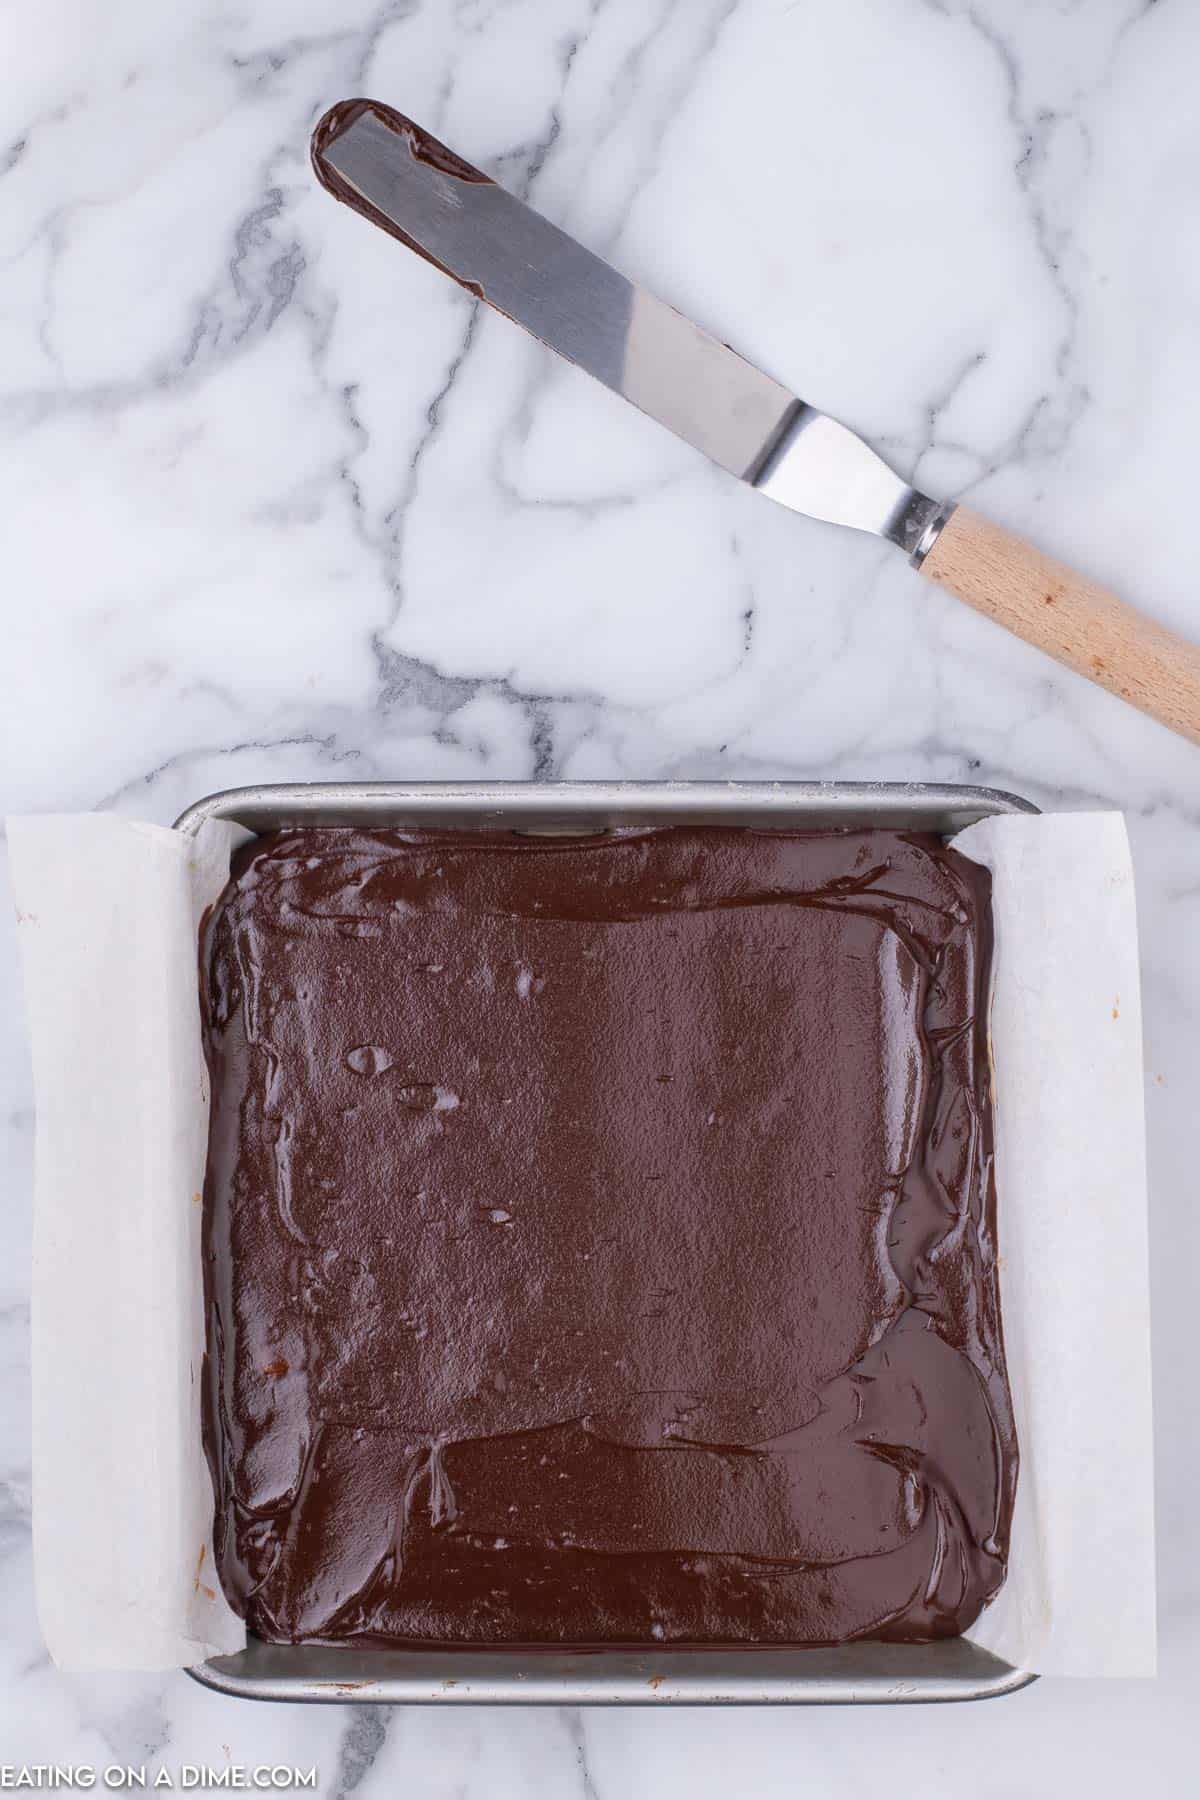 Chocolate layer in the baking dish lined with parchment paper